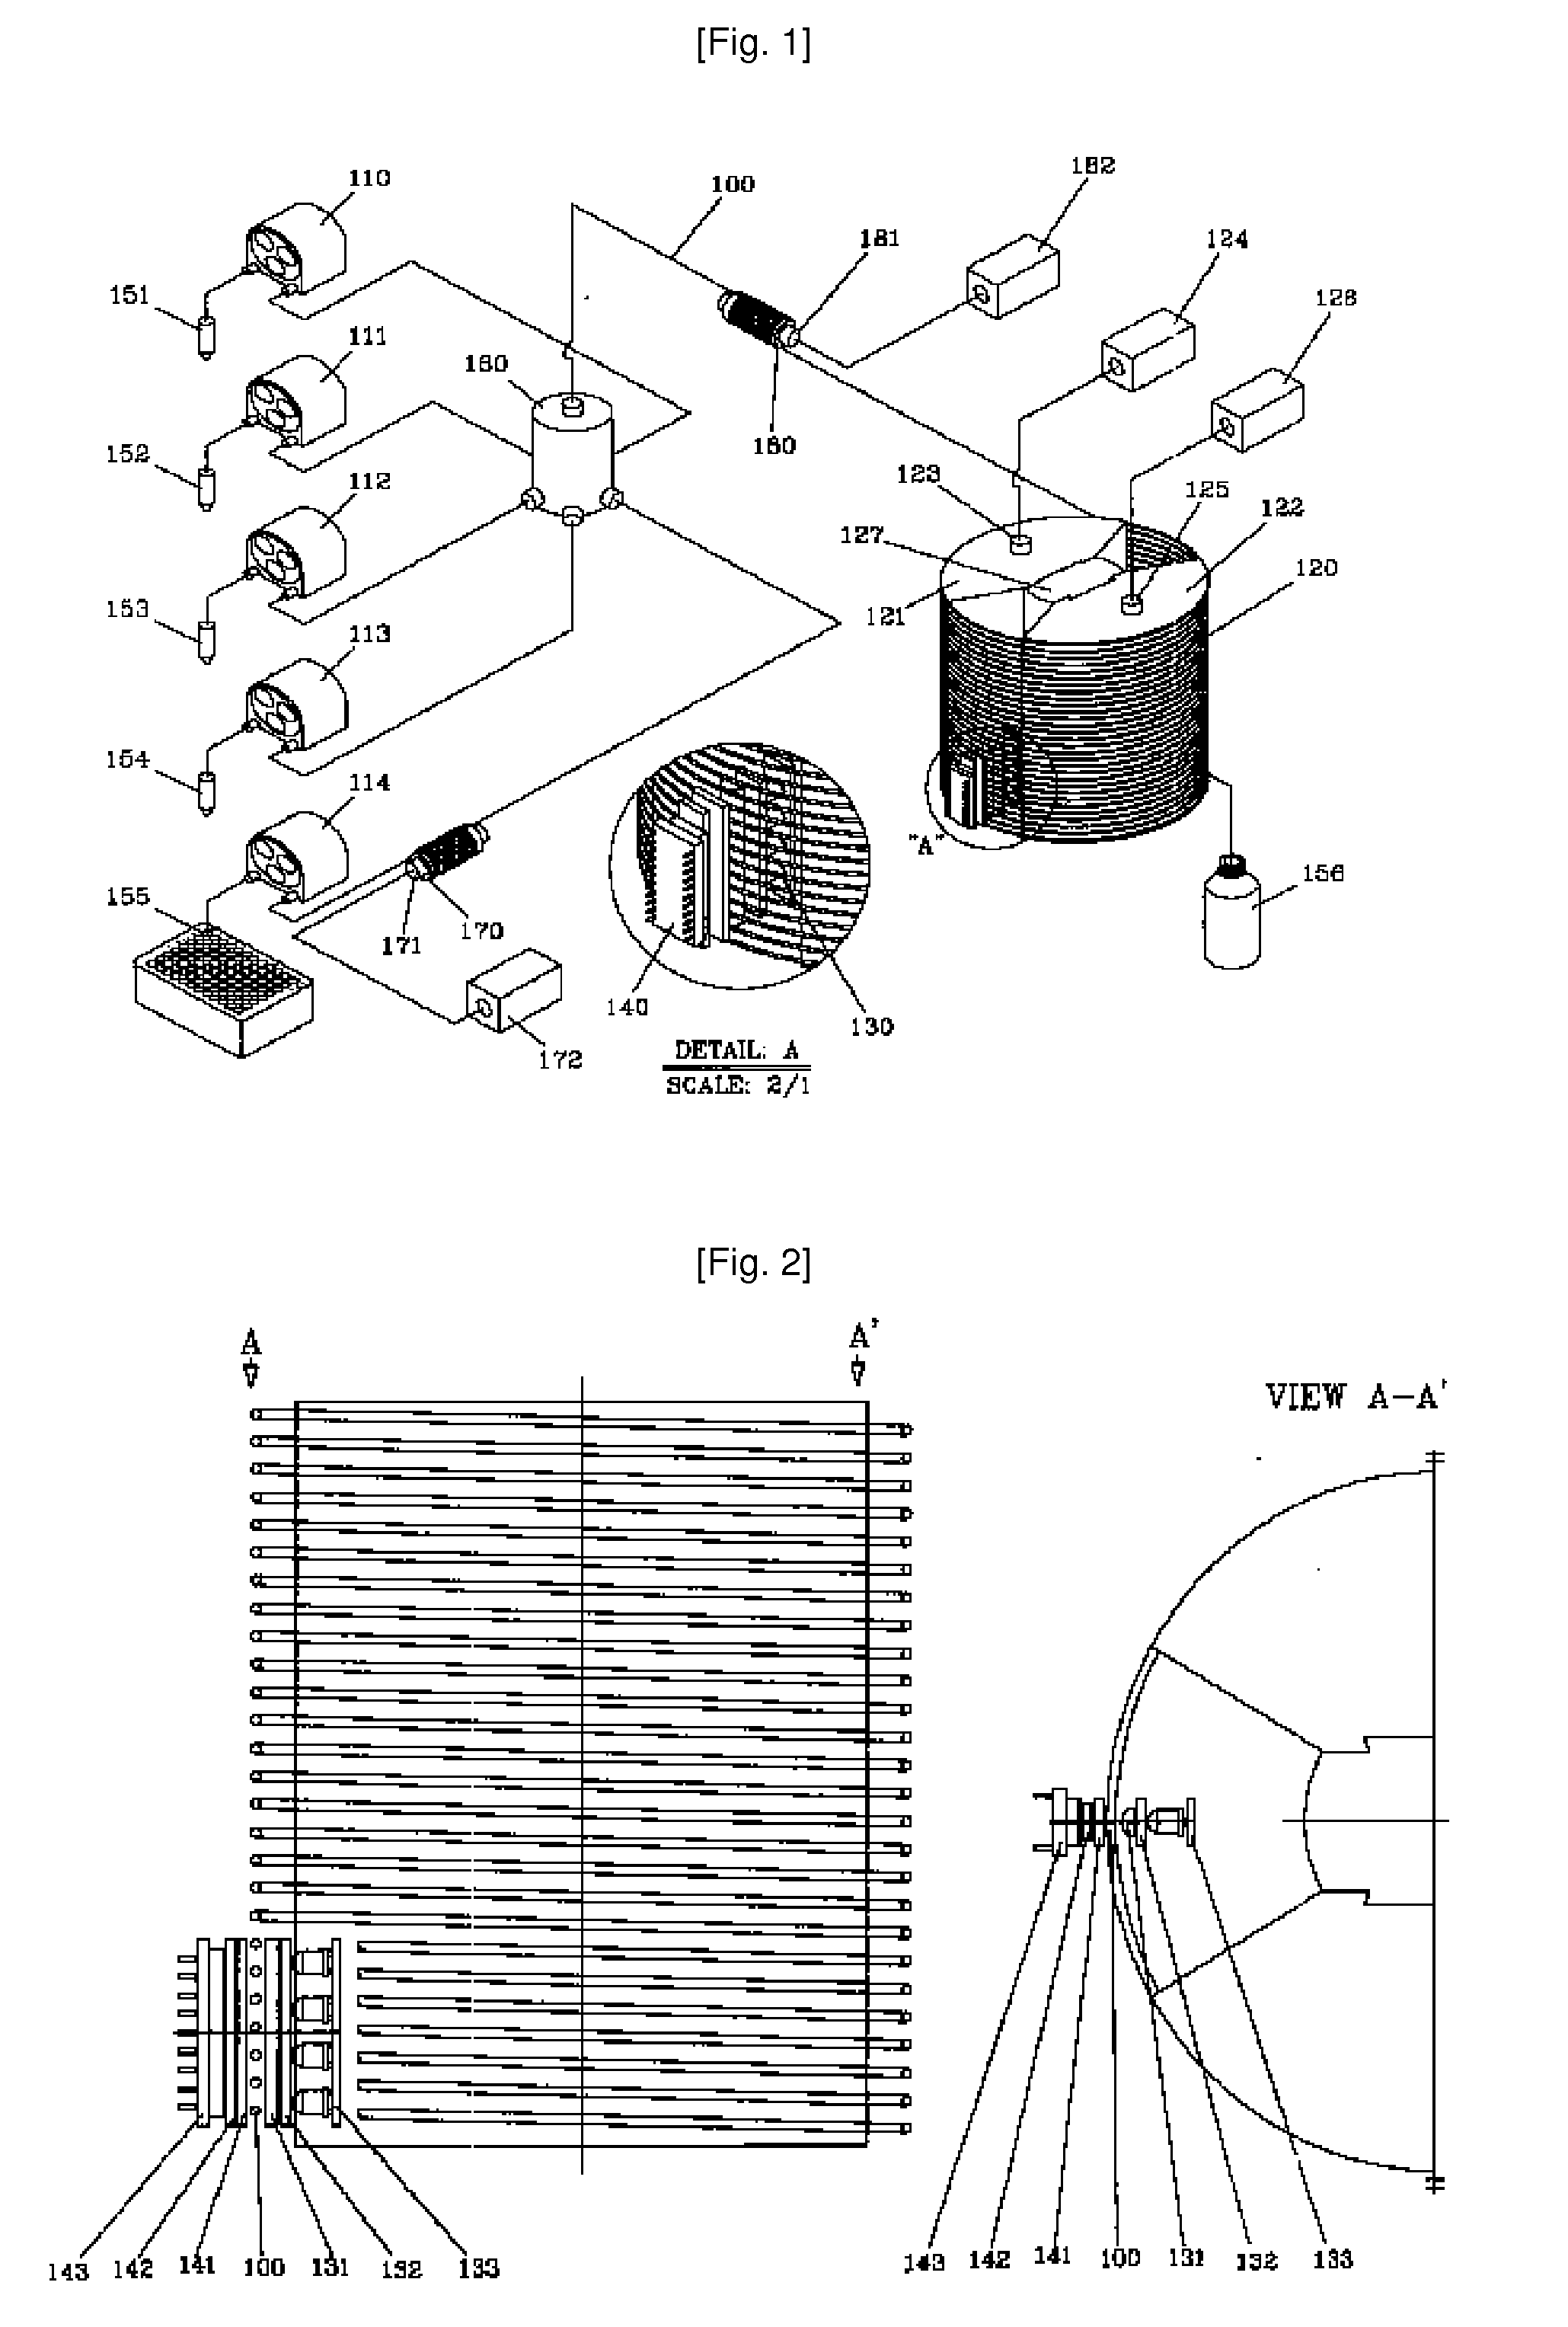 Miniaturized Apparatus For Real-Time Monitoring